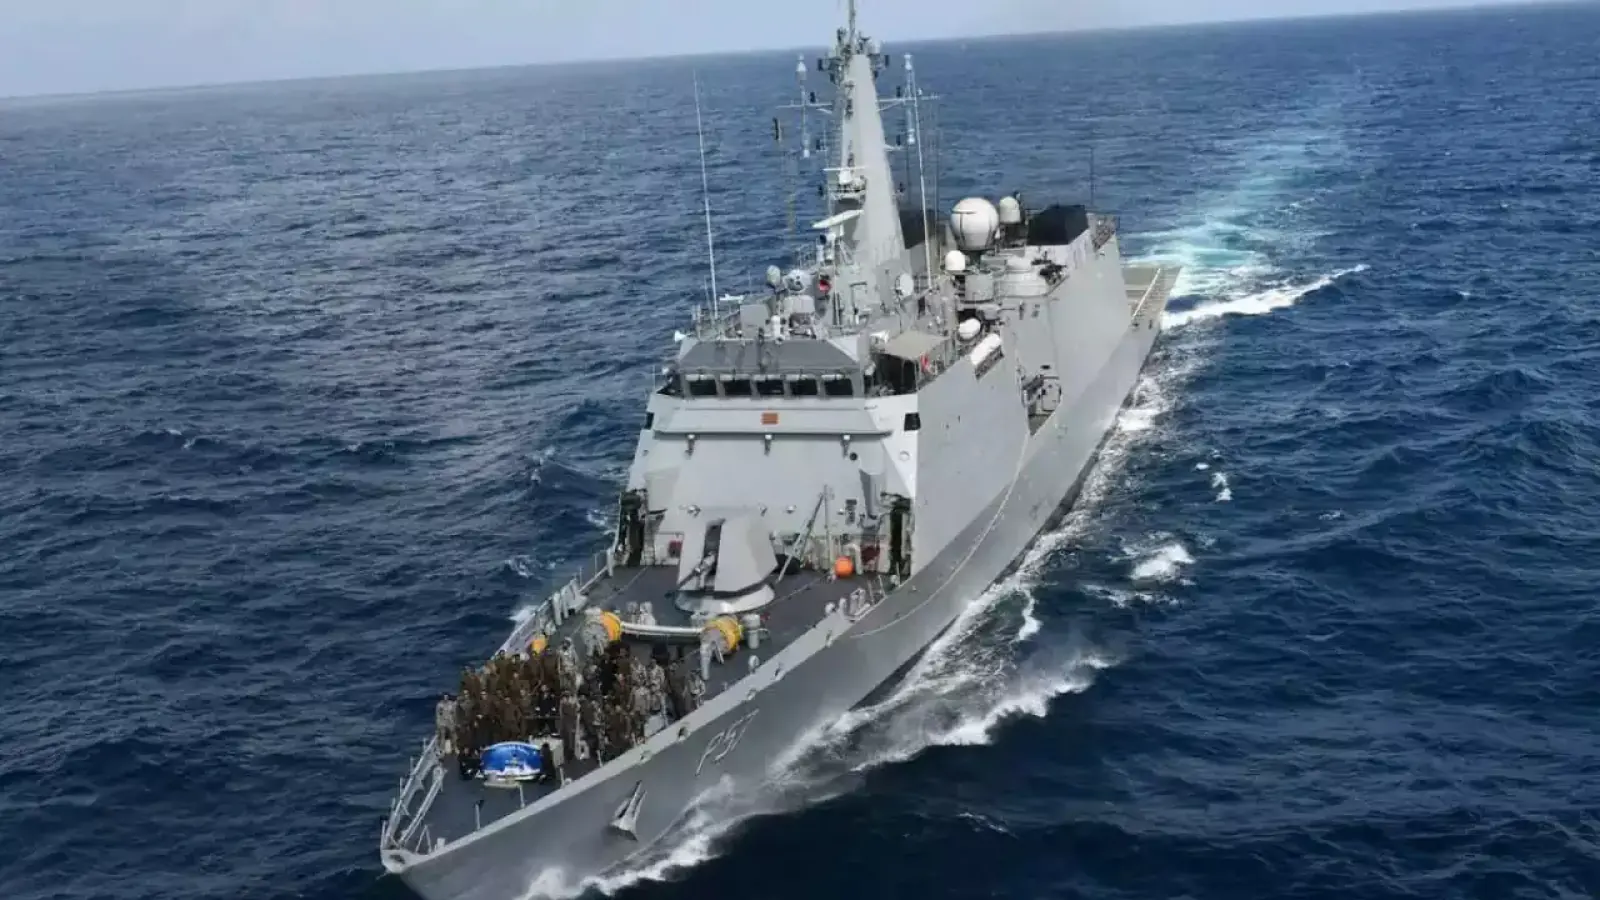 Indian warship provided help to a cargo ship in the Gulf of Aden, which caught fire after the missile attack